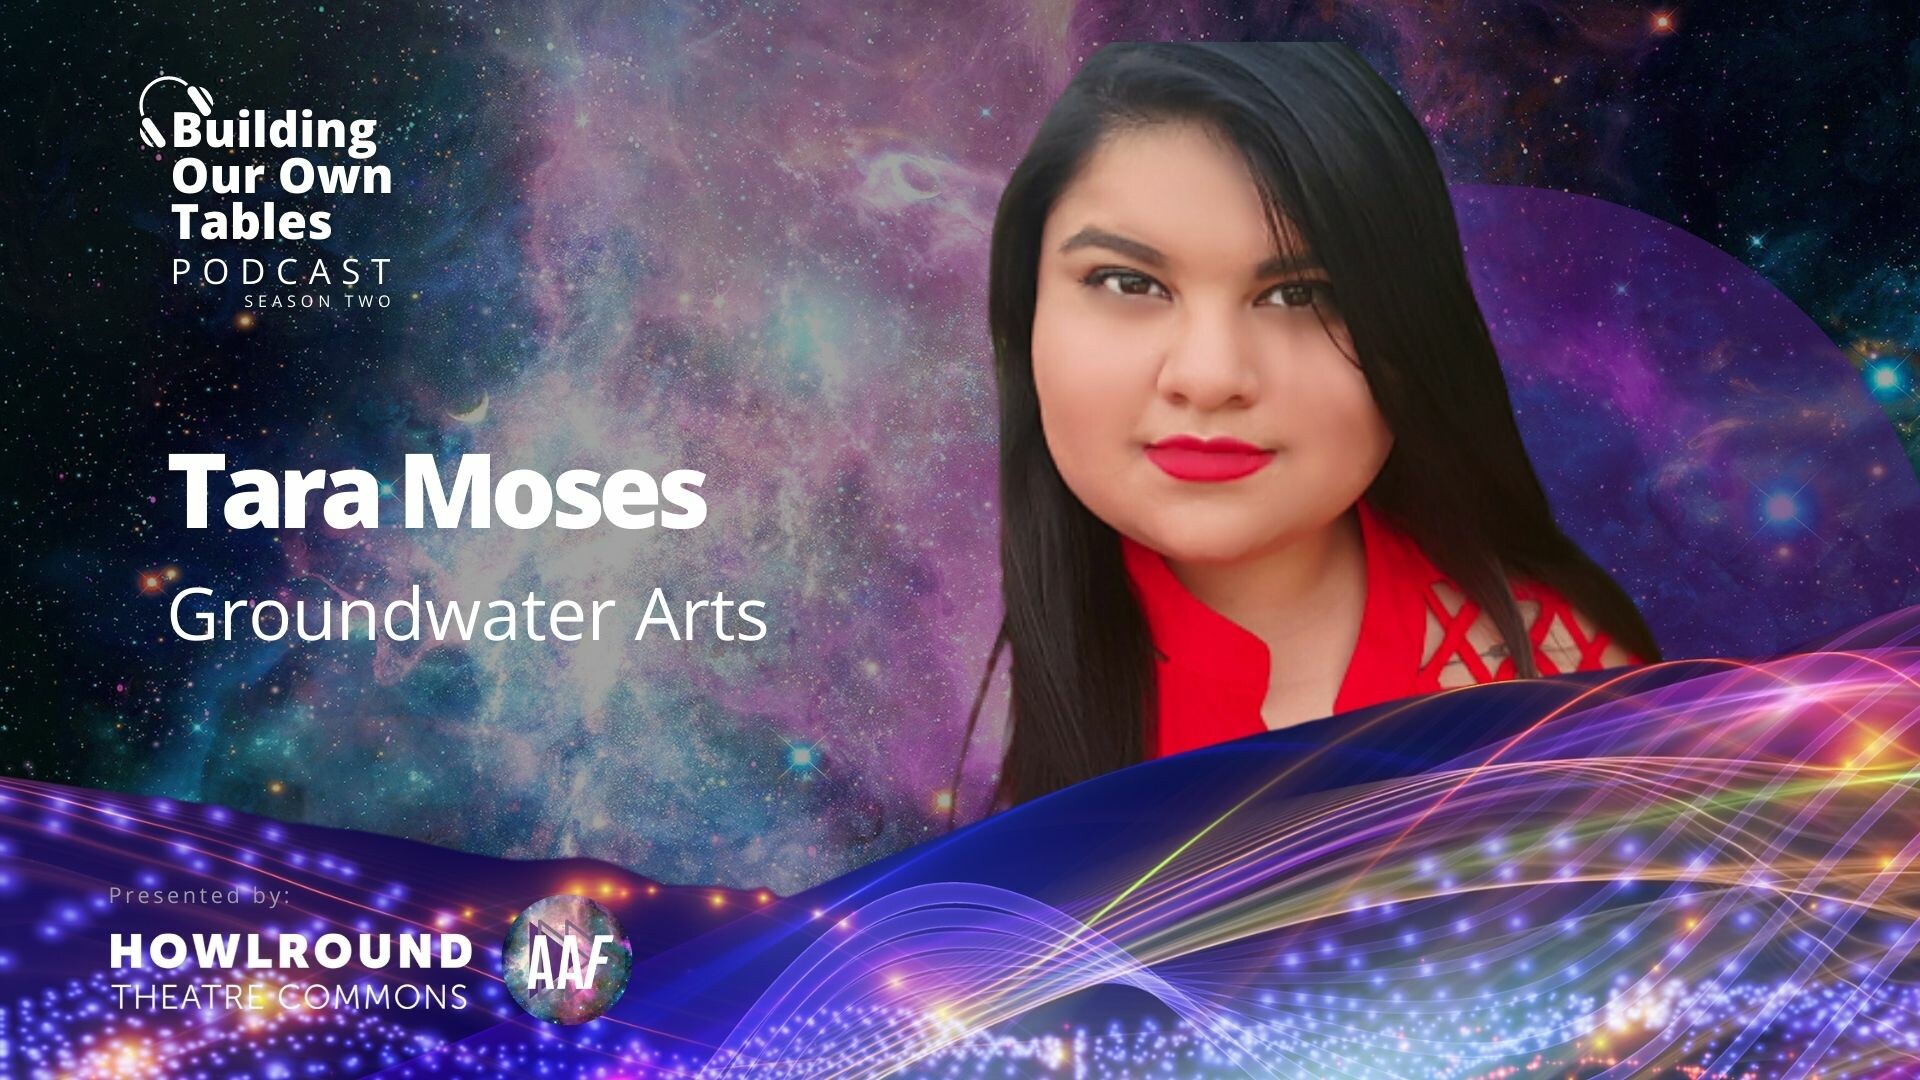 A headshot of Tara Moses against a galaxy backdrop with the logo for Building Our Own Tables to the left.